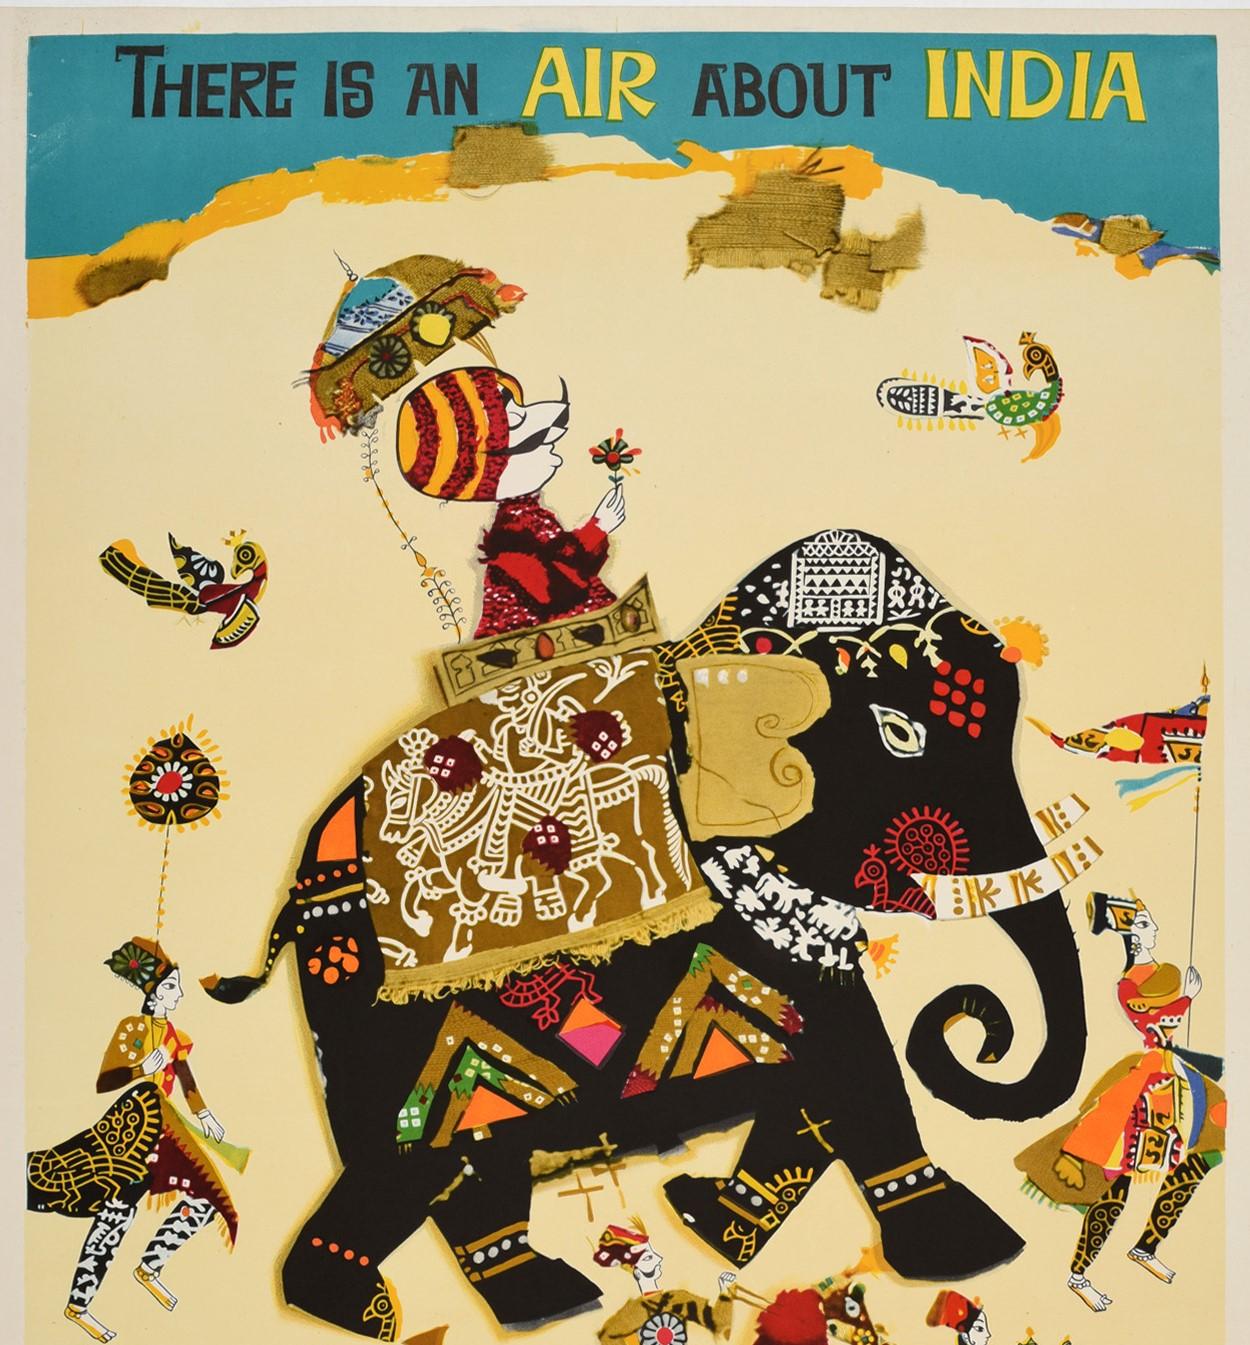 Original vintage travel poster for India issued by Air India - There is an Air about India - featuring a colourful collage style illustration depicting the Air India mascot (a Maharajah created in 1946 by Bobby Kooka and Umesh Rao) riding a